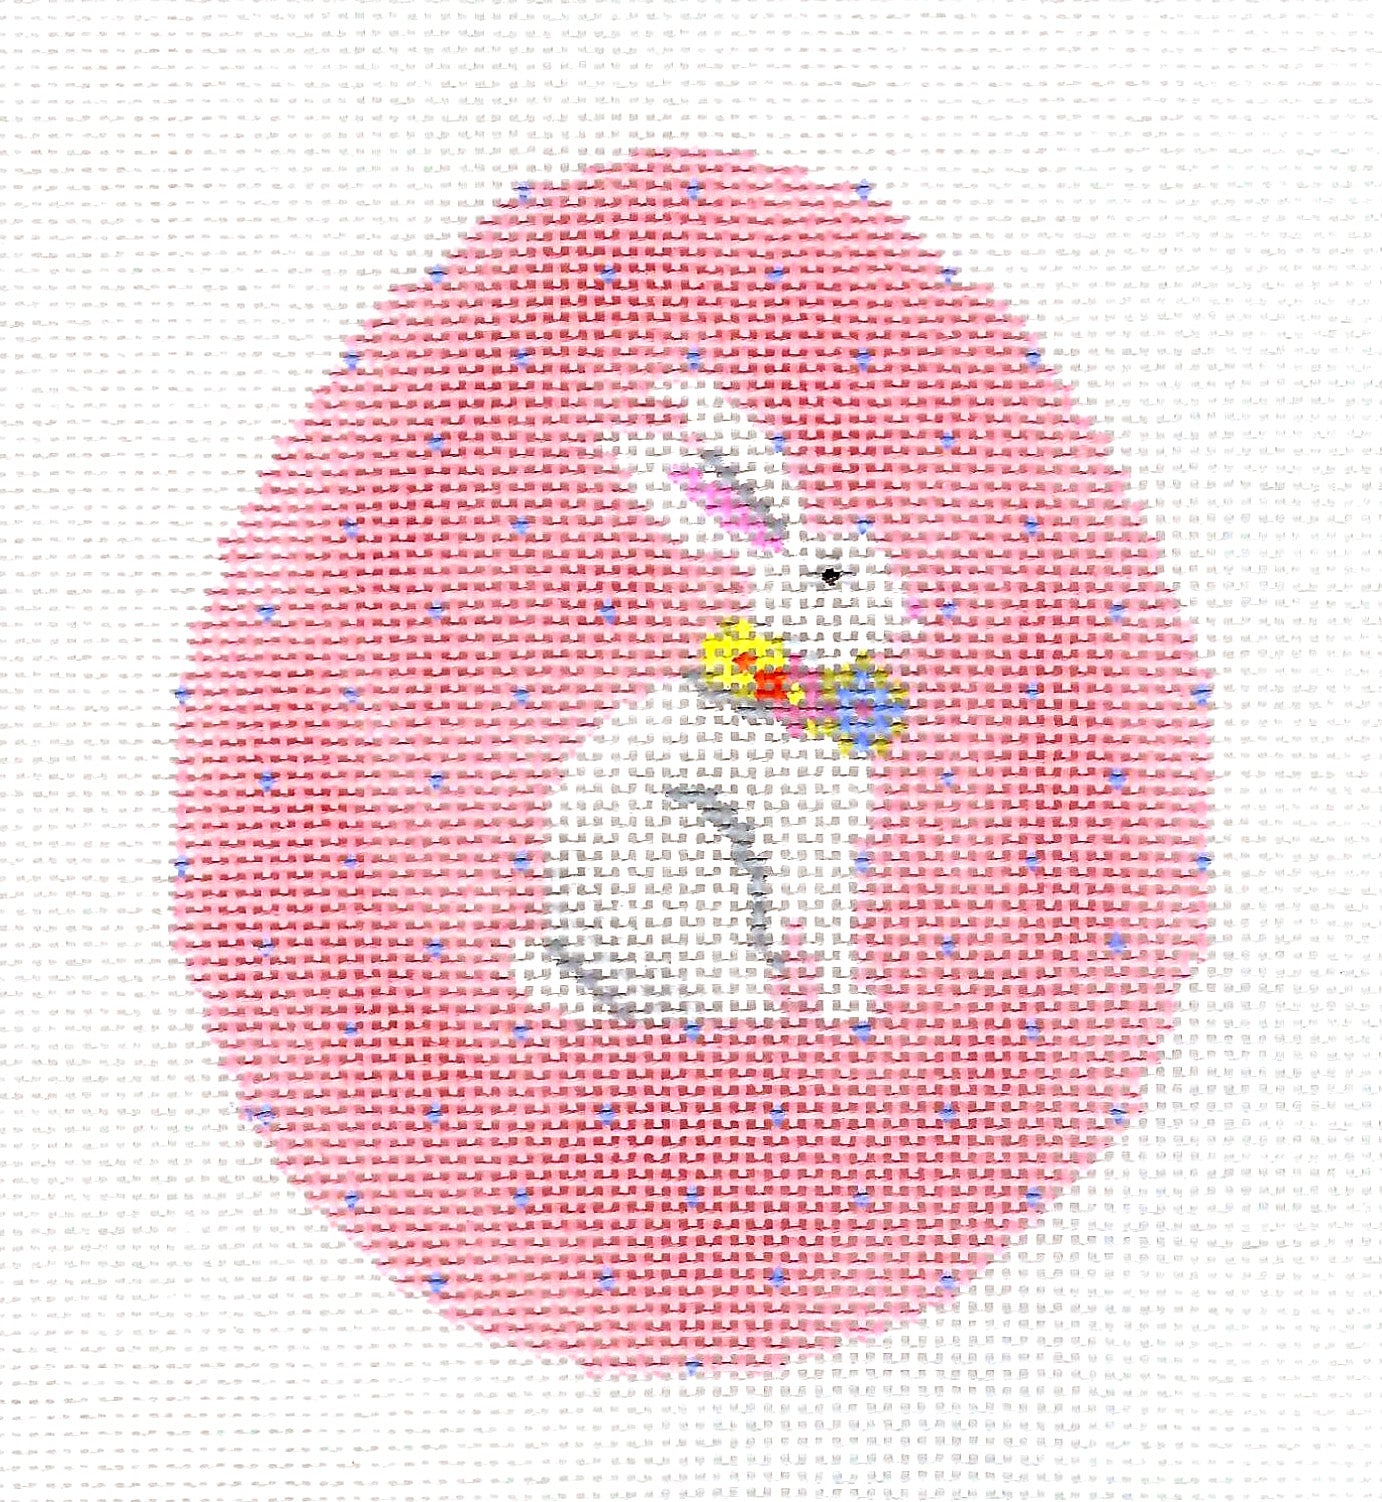 Kelly Clark - White Rabbit on a Pink Egg for Easter handpainted Needlepoint Canvas by Kelly Clark